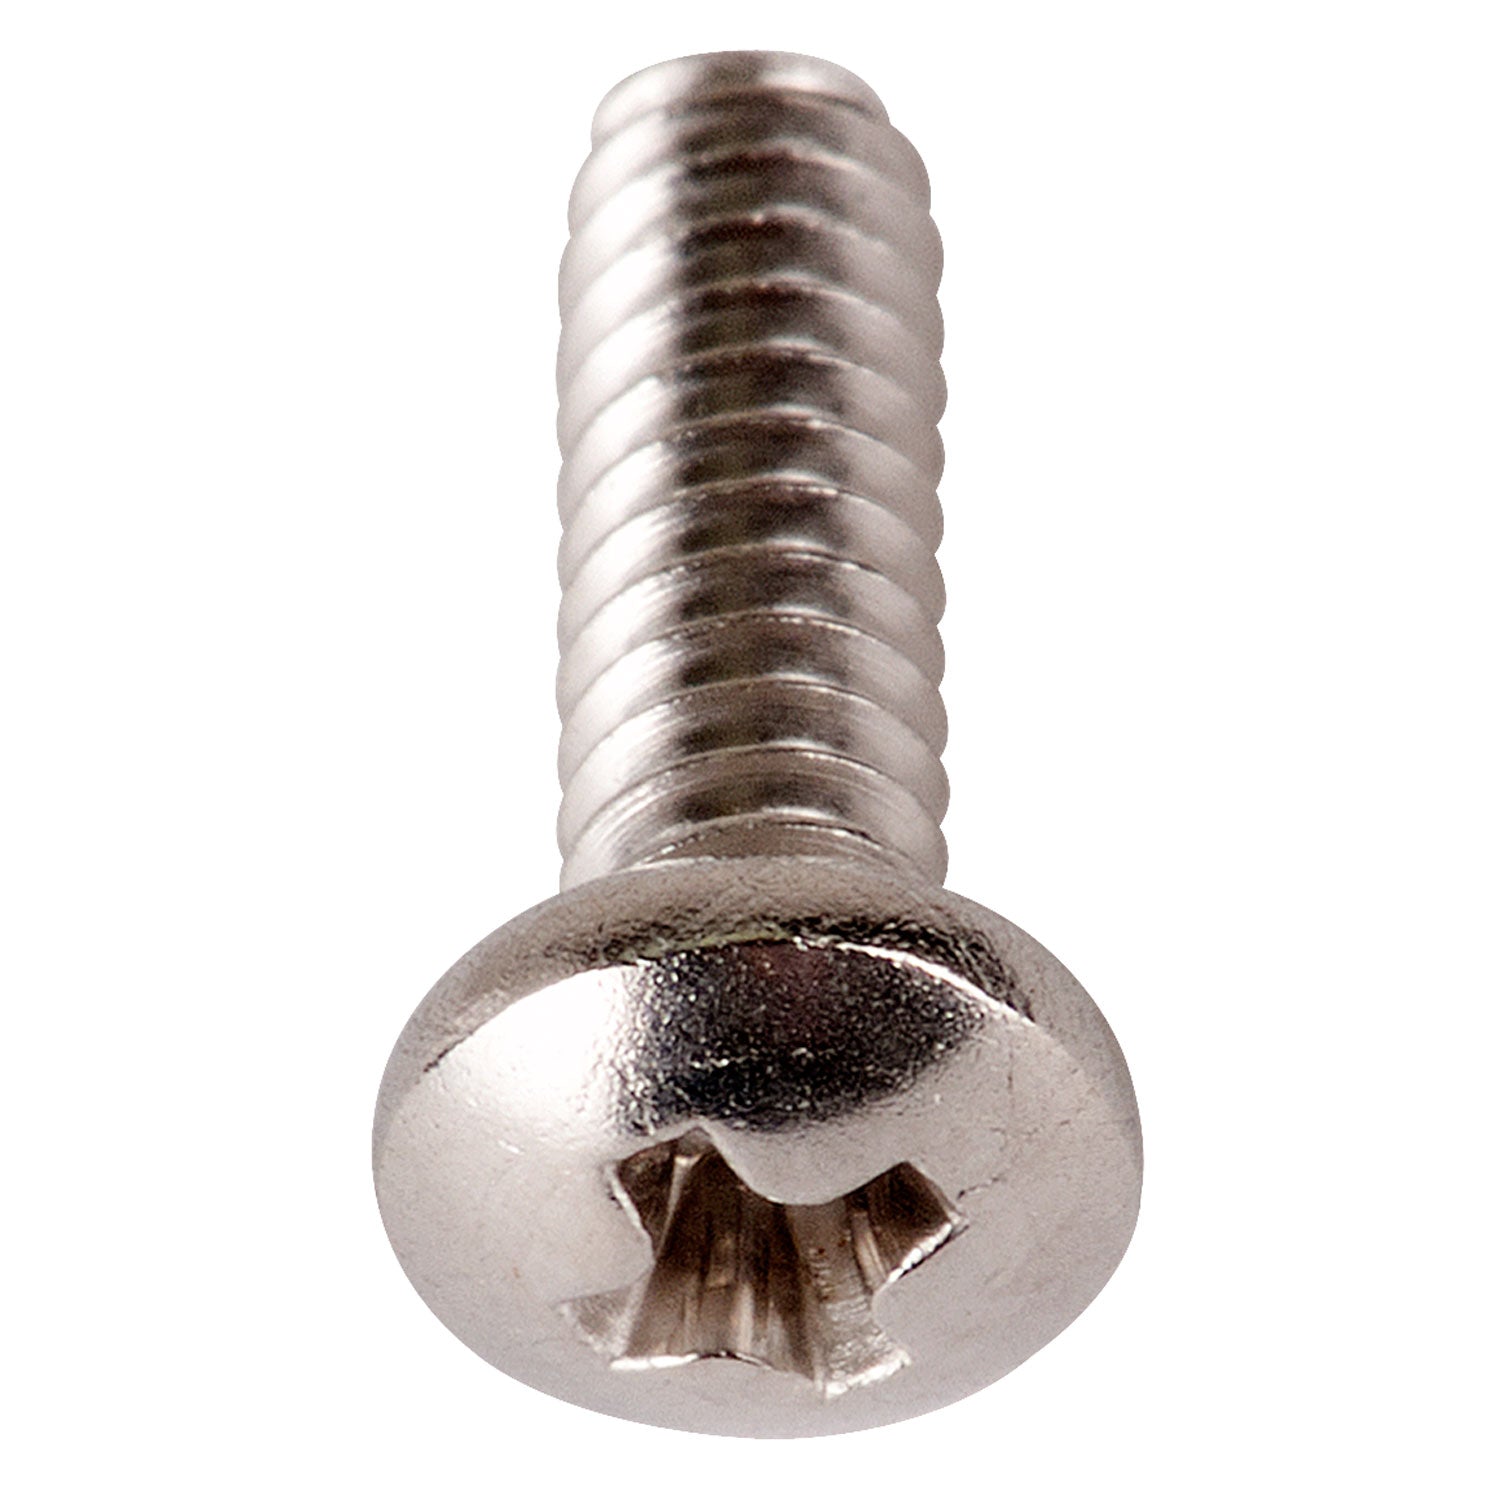 Screw for 1-inch Ball Mount for DS160, DS161, DS51 Strobes